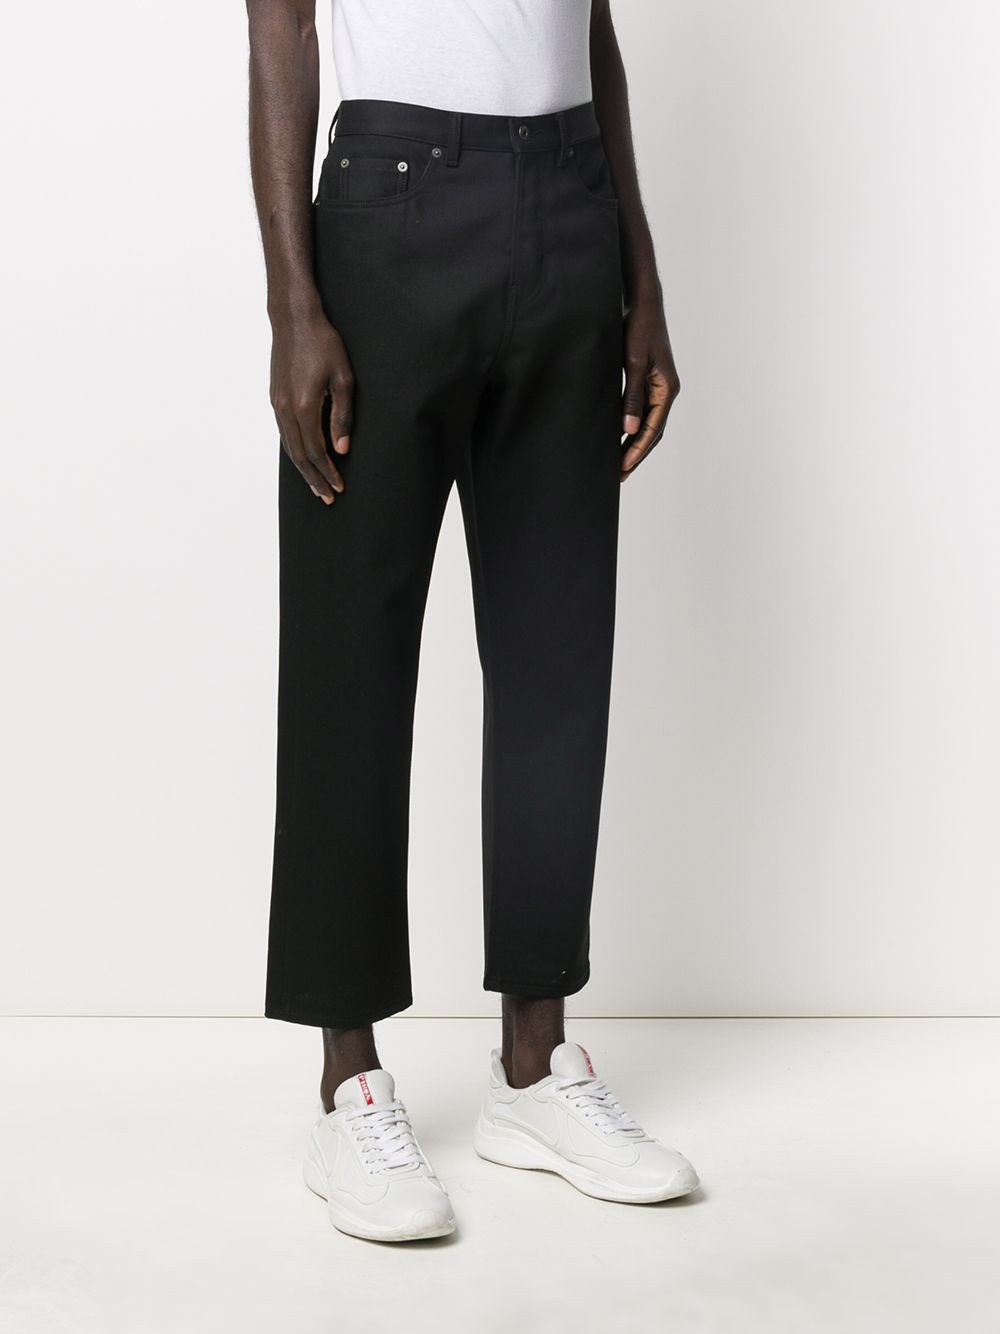 Shop Valentino VLOGO cropped jeans with Express Delivery - FARFETCH